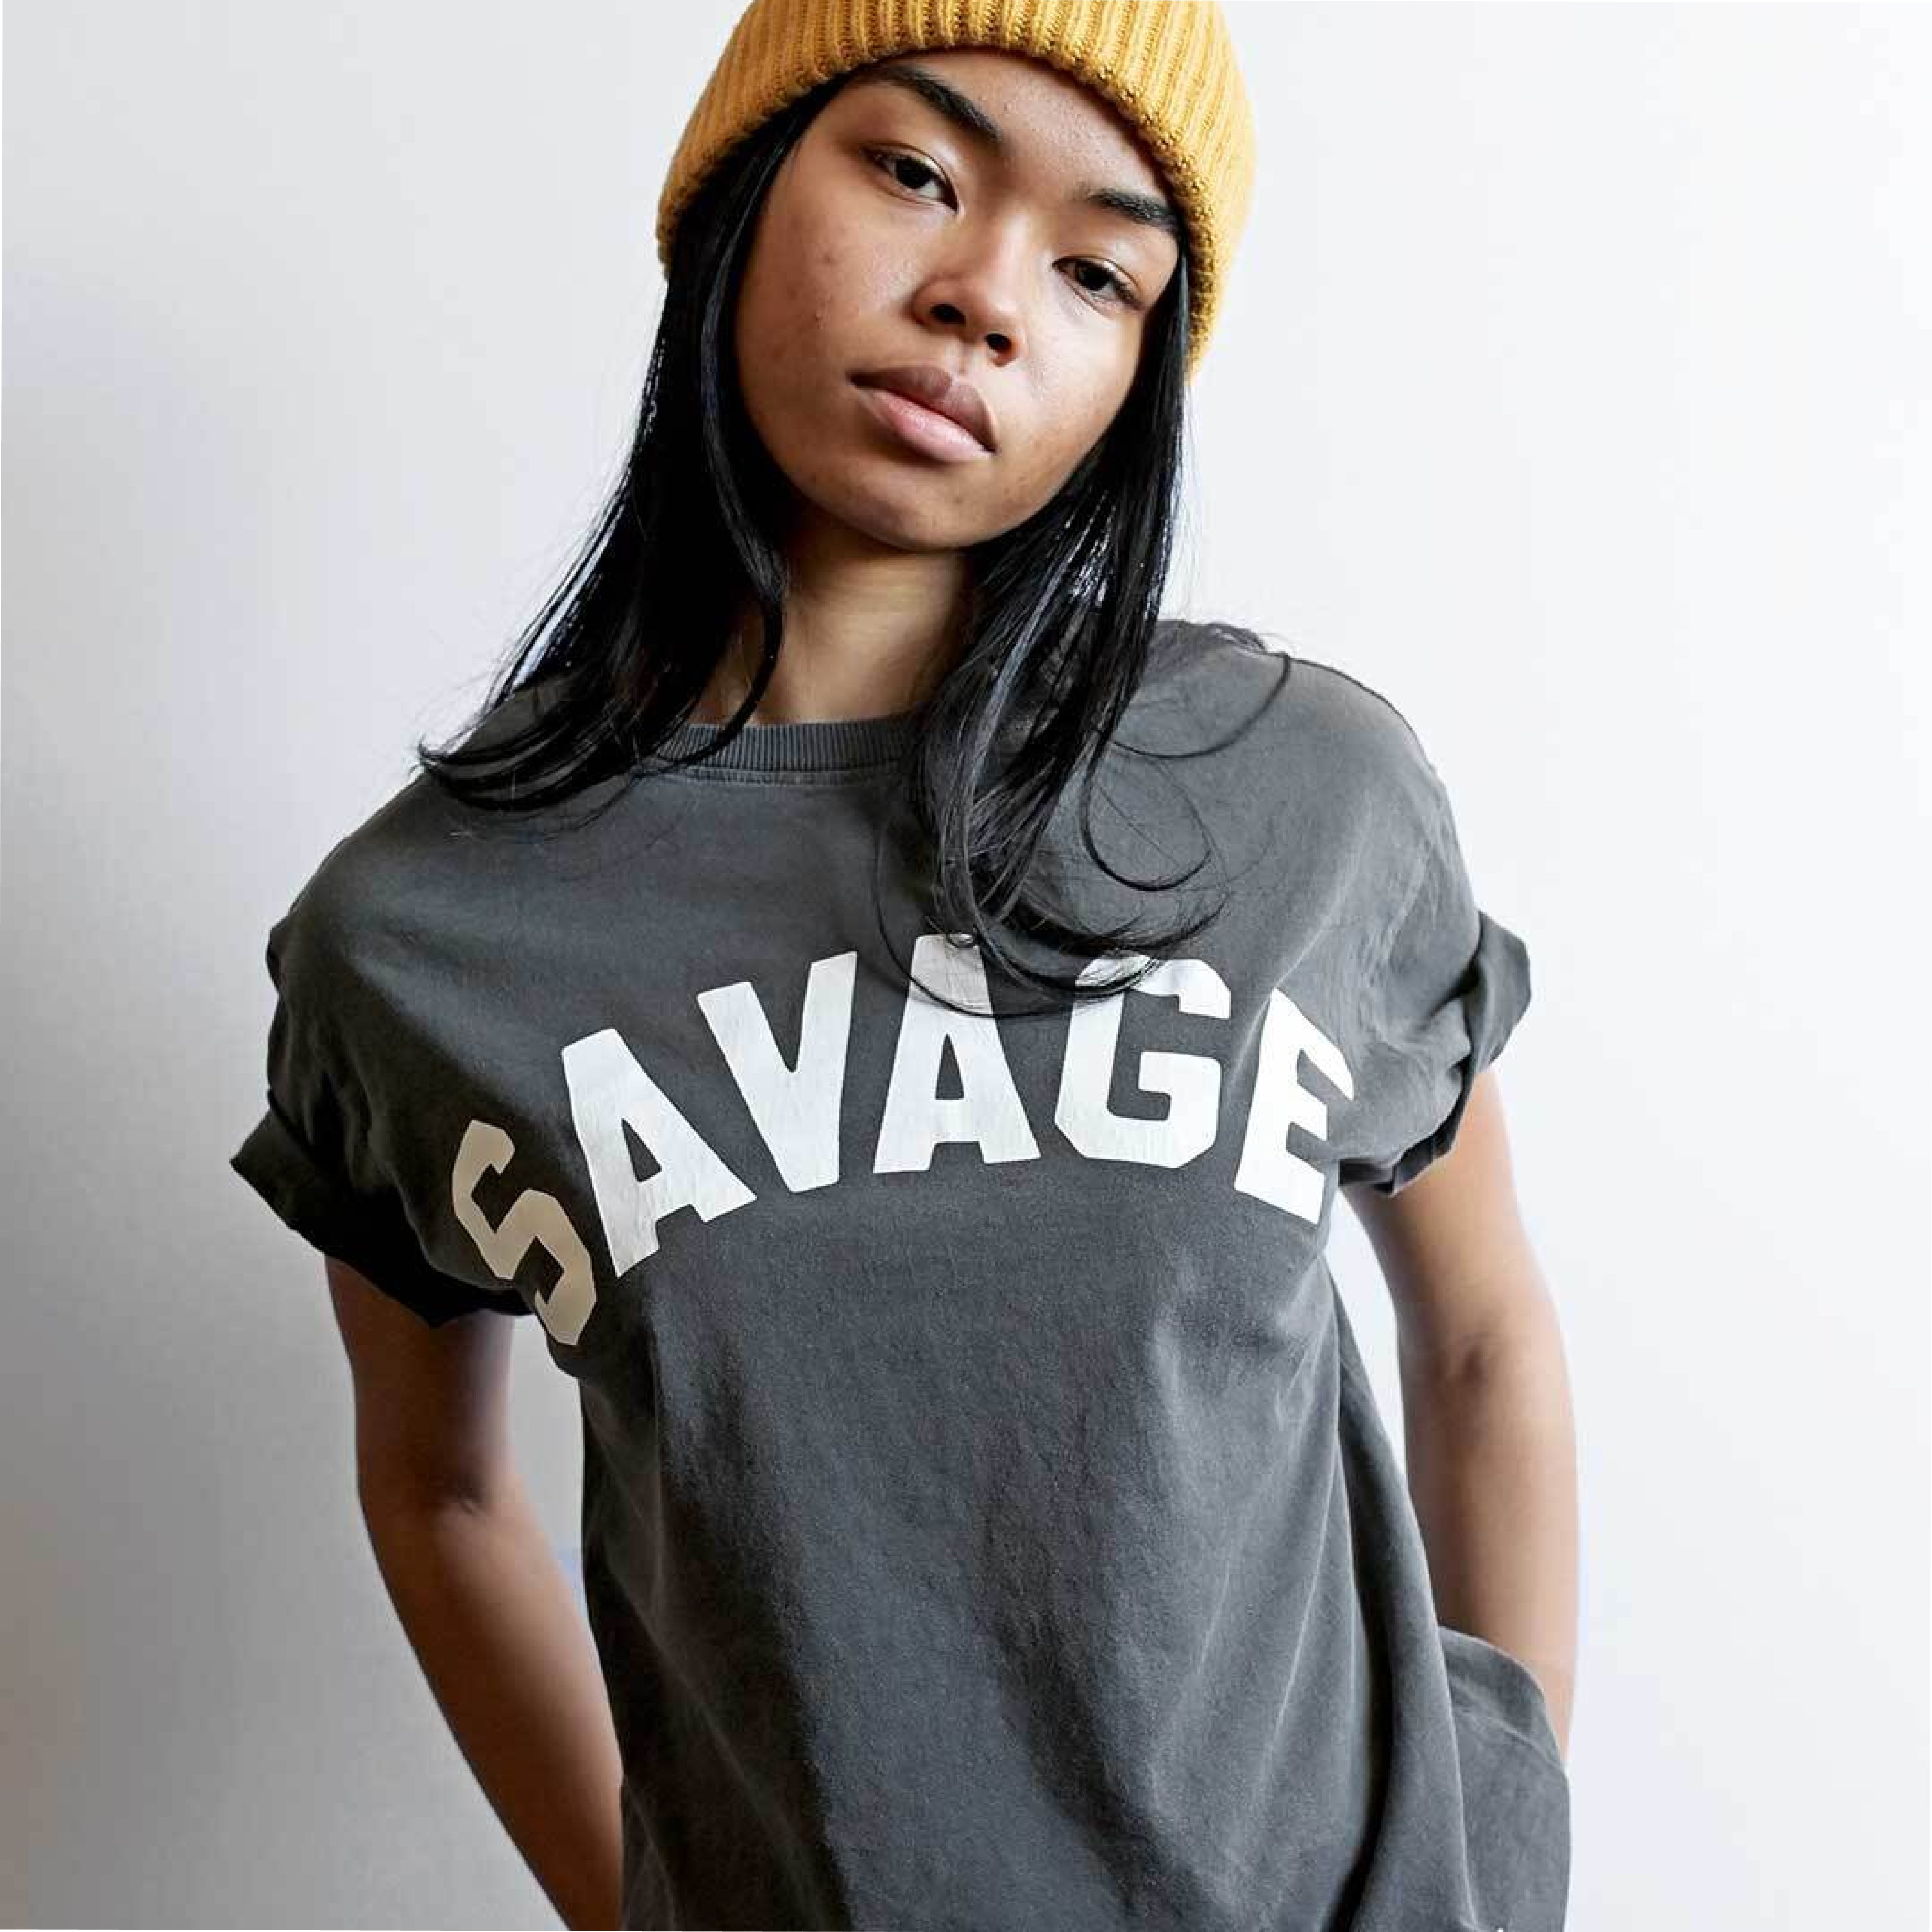 Woman wearing a yellow beanie and gray 'SAVAGE' t-shirt.